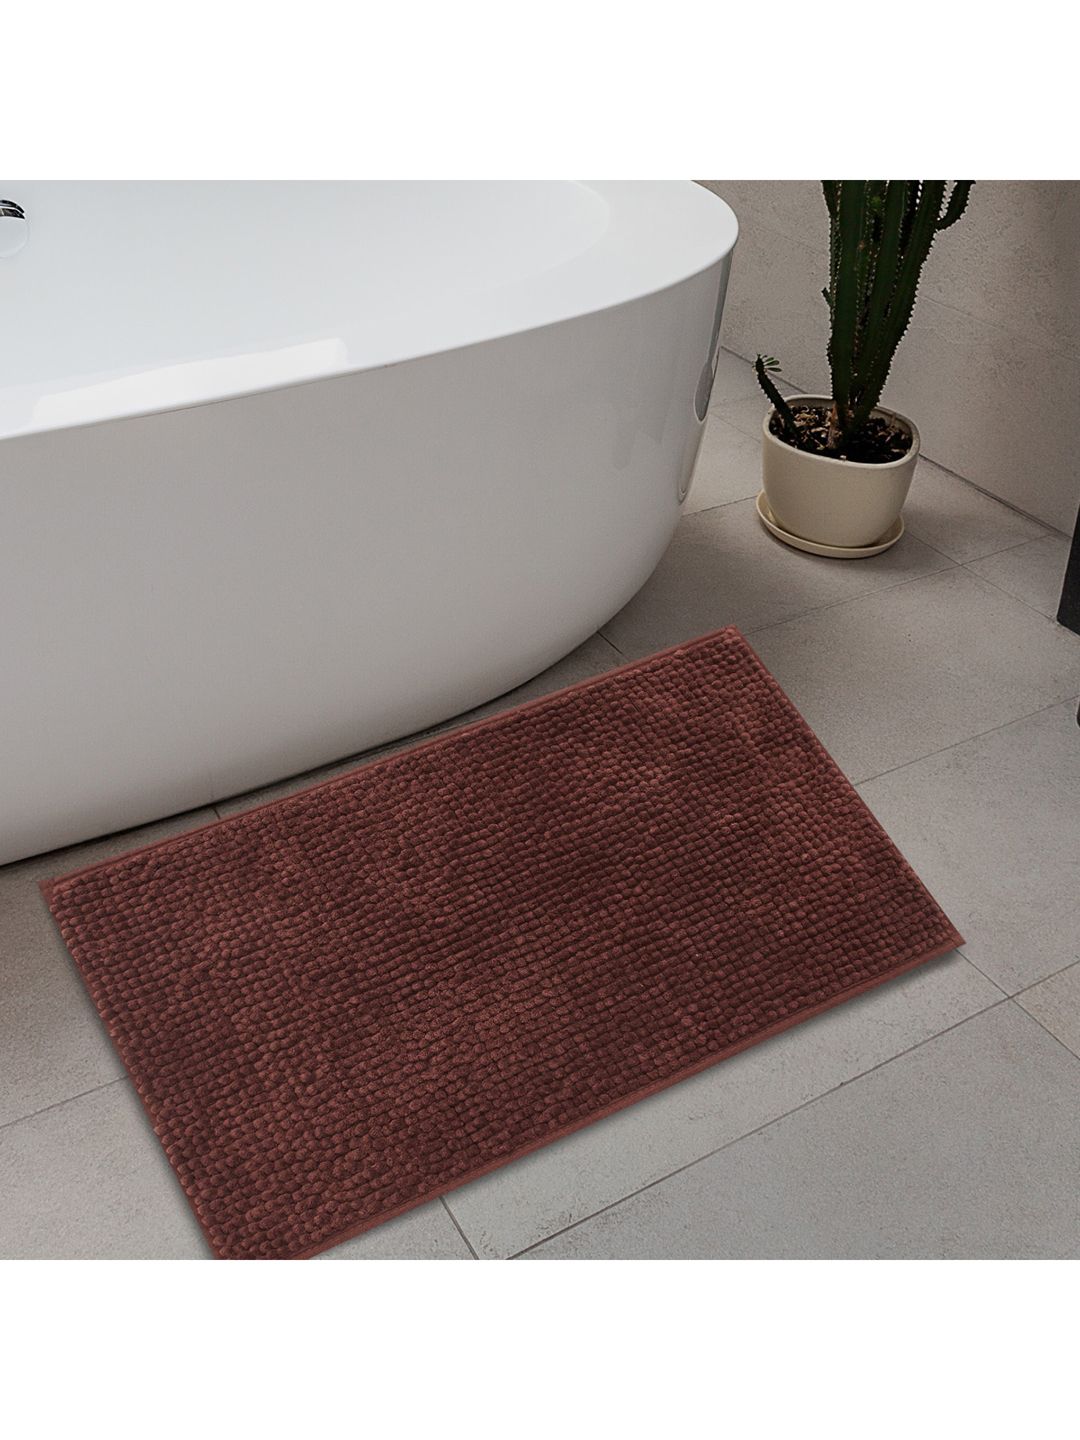 Home Centre Brown Colour Connect-Essence Textured Rectangle Bath Mat 400 GSM Price in India